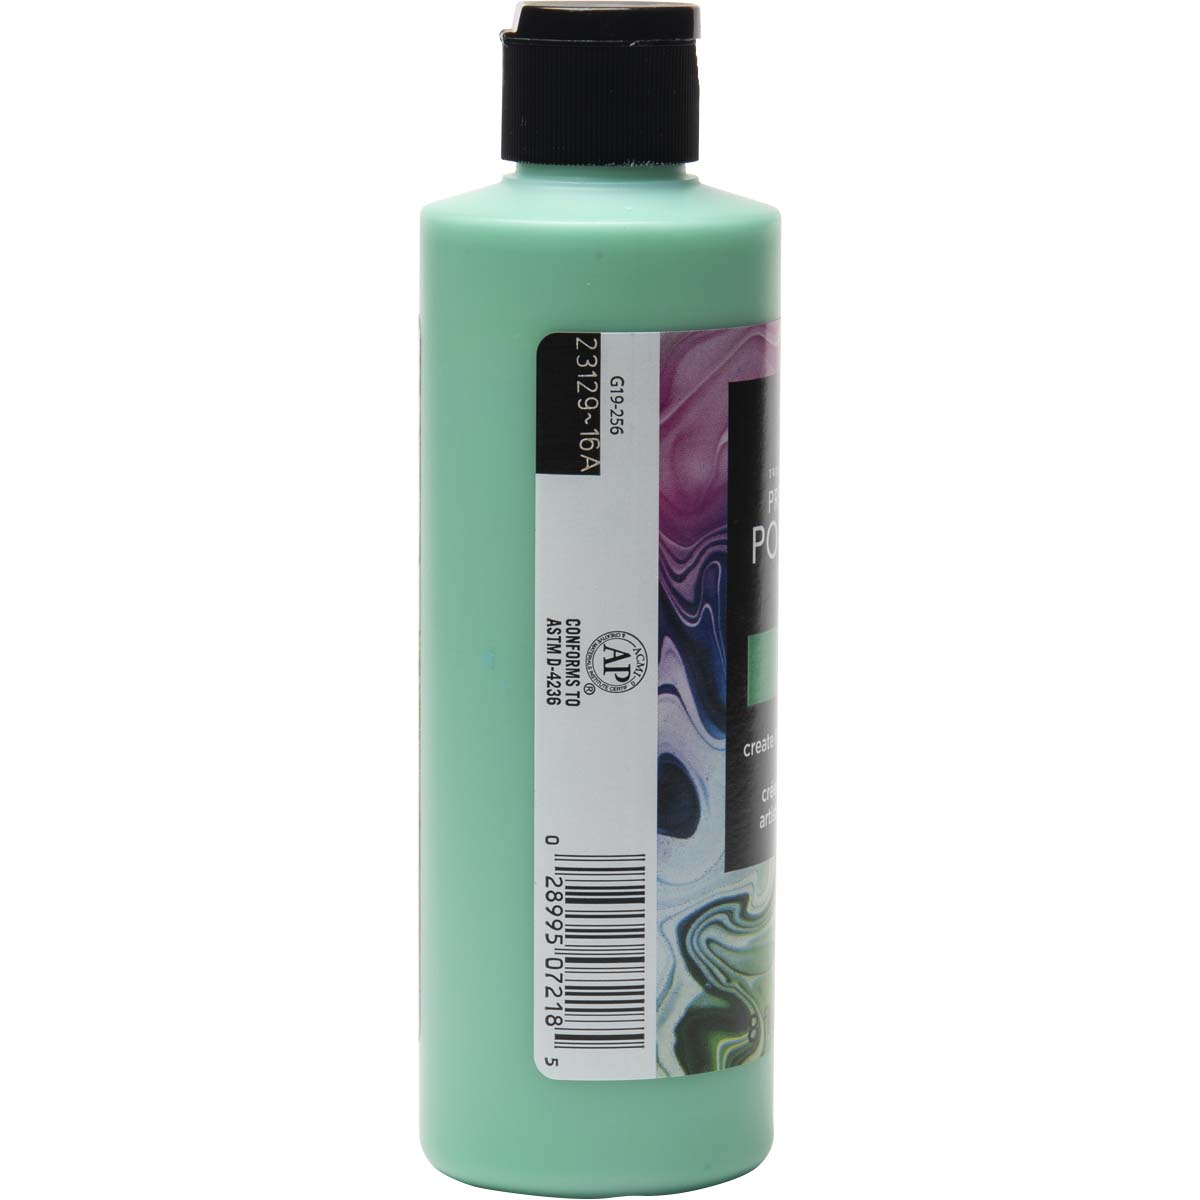 FolkArt ® Pre-mixed Pouring Paint - Green, 8 oz. - 7218